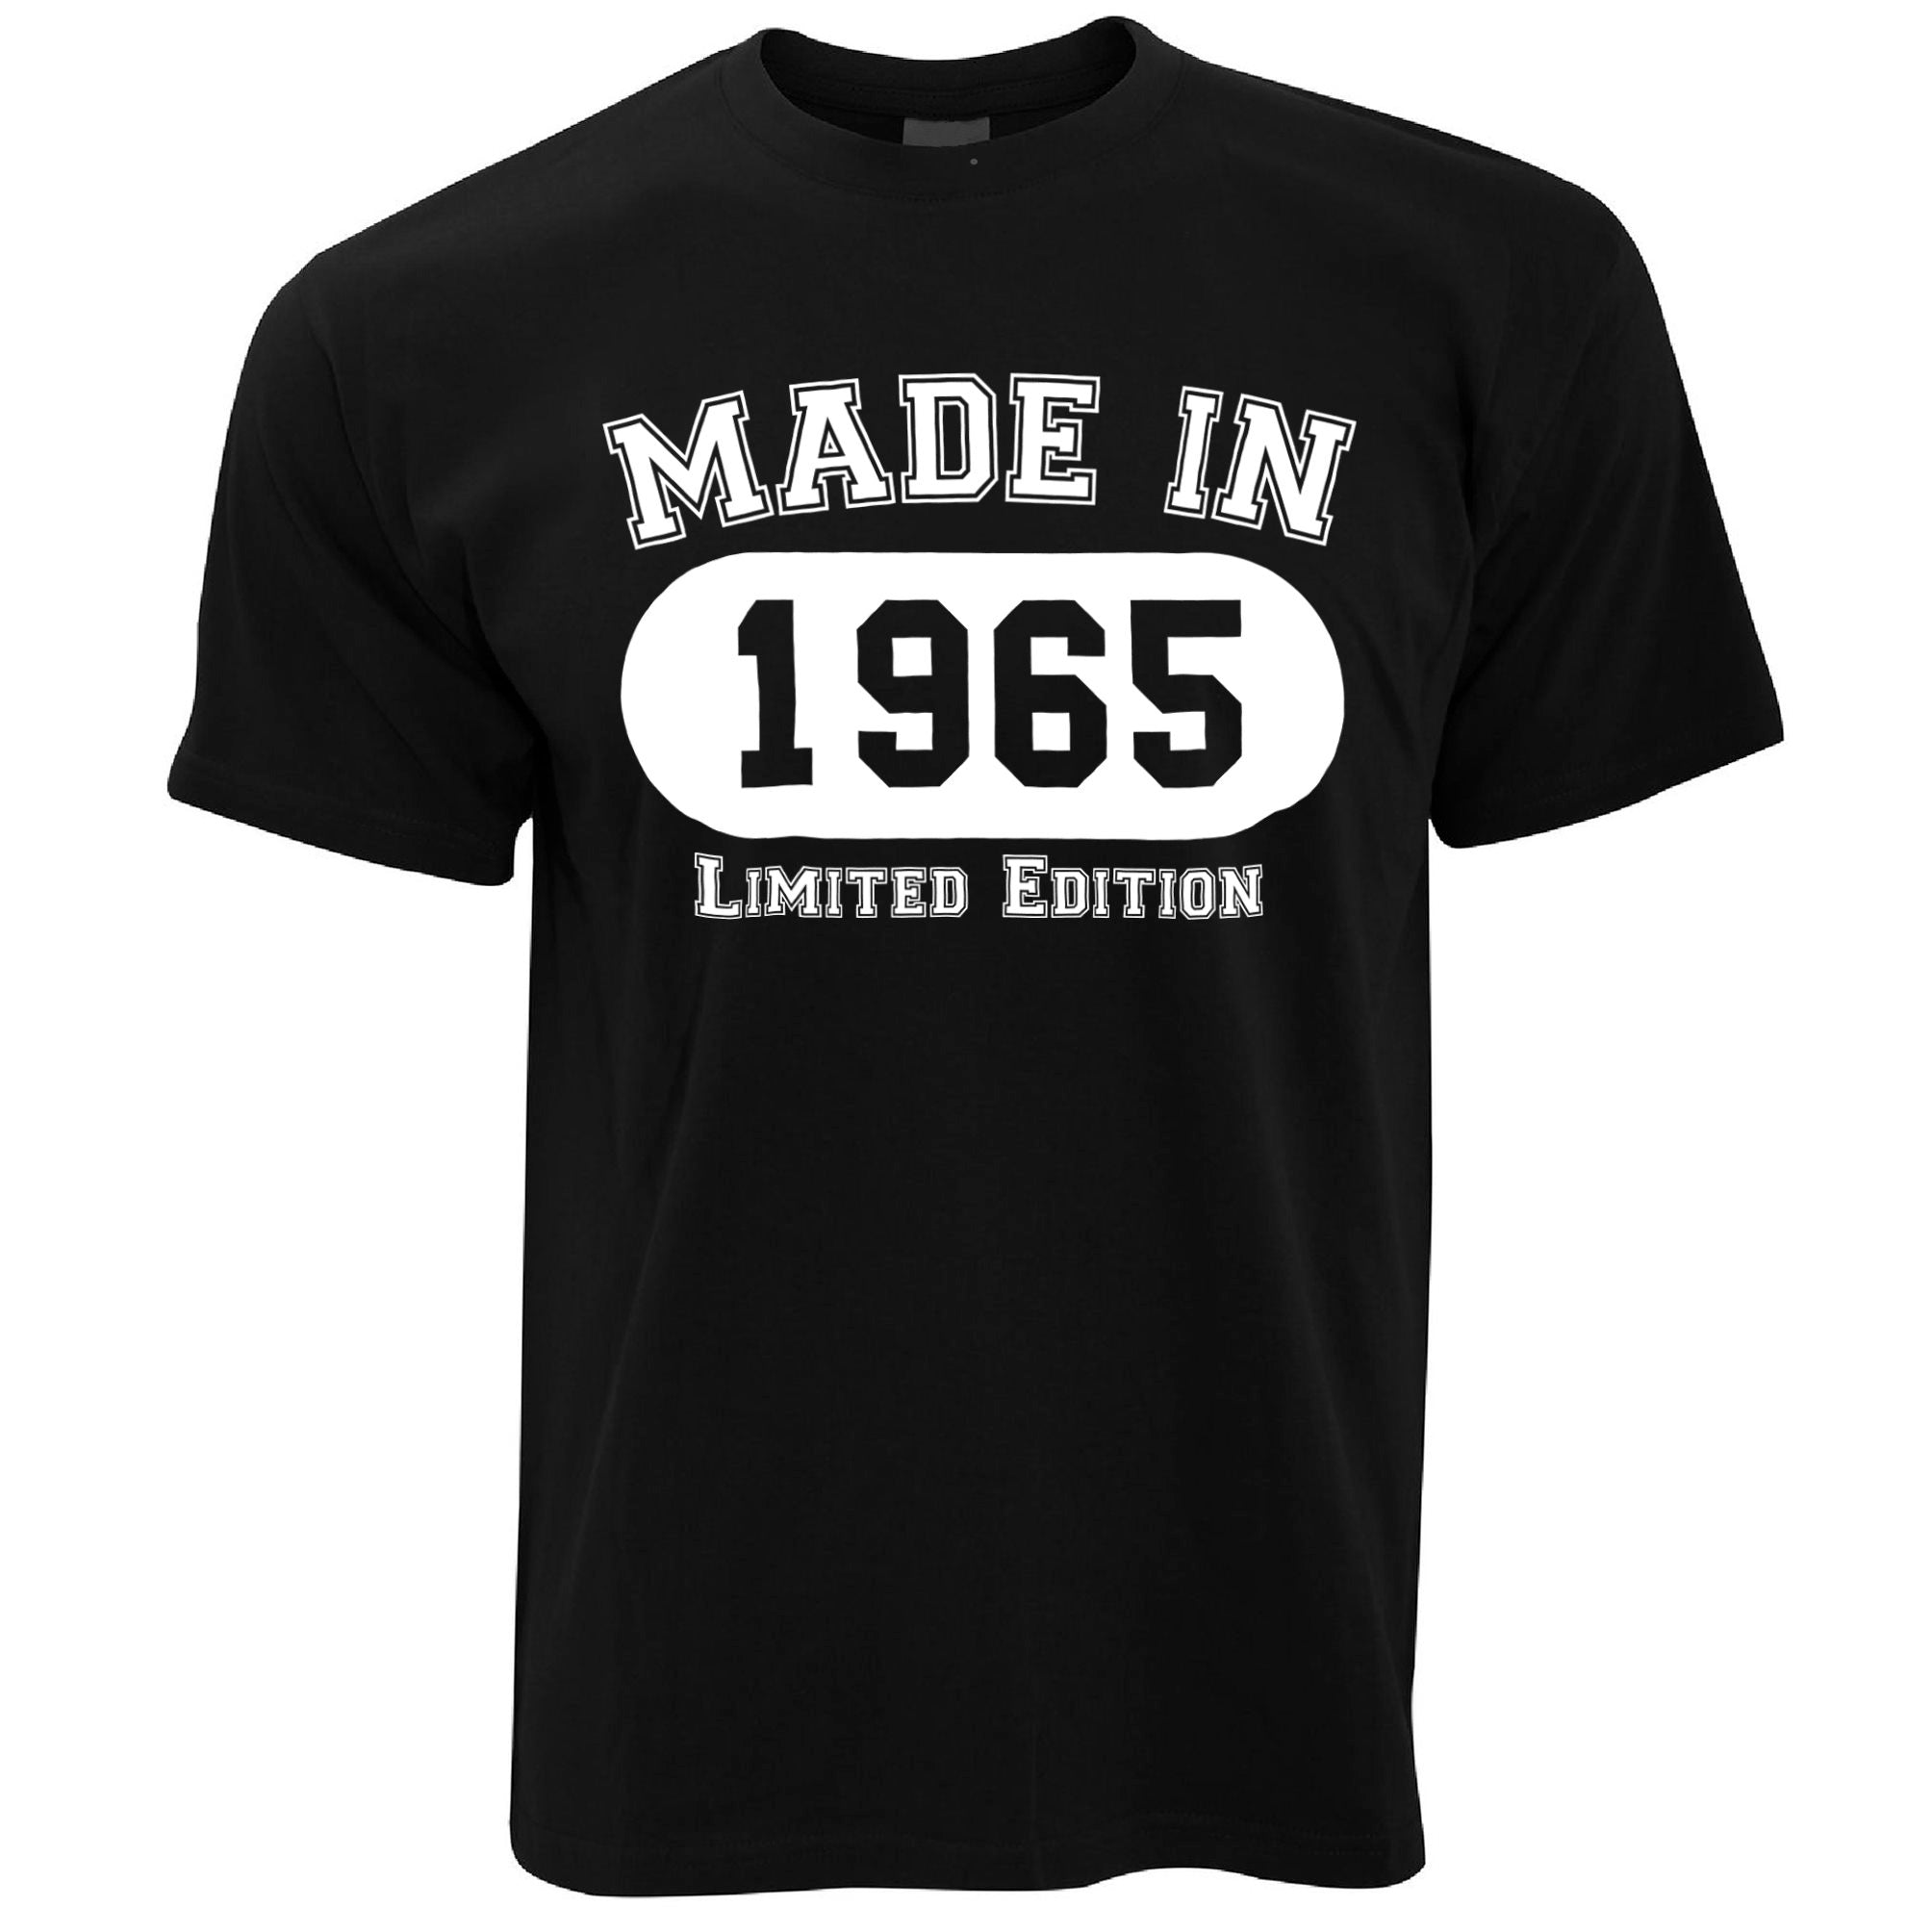 Birthday T Shirt Made in 1965 Limited Edition